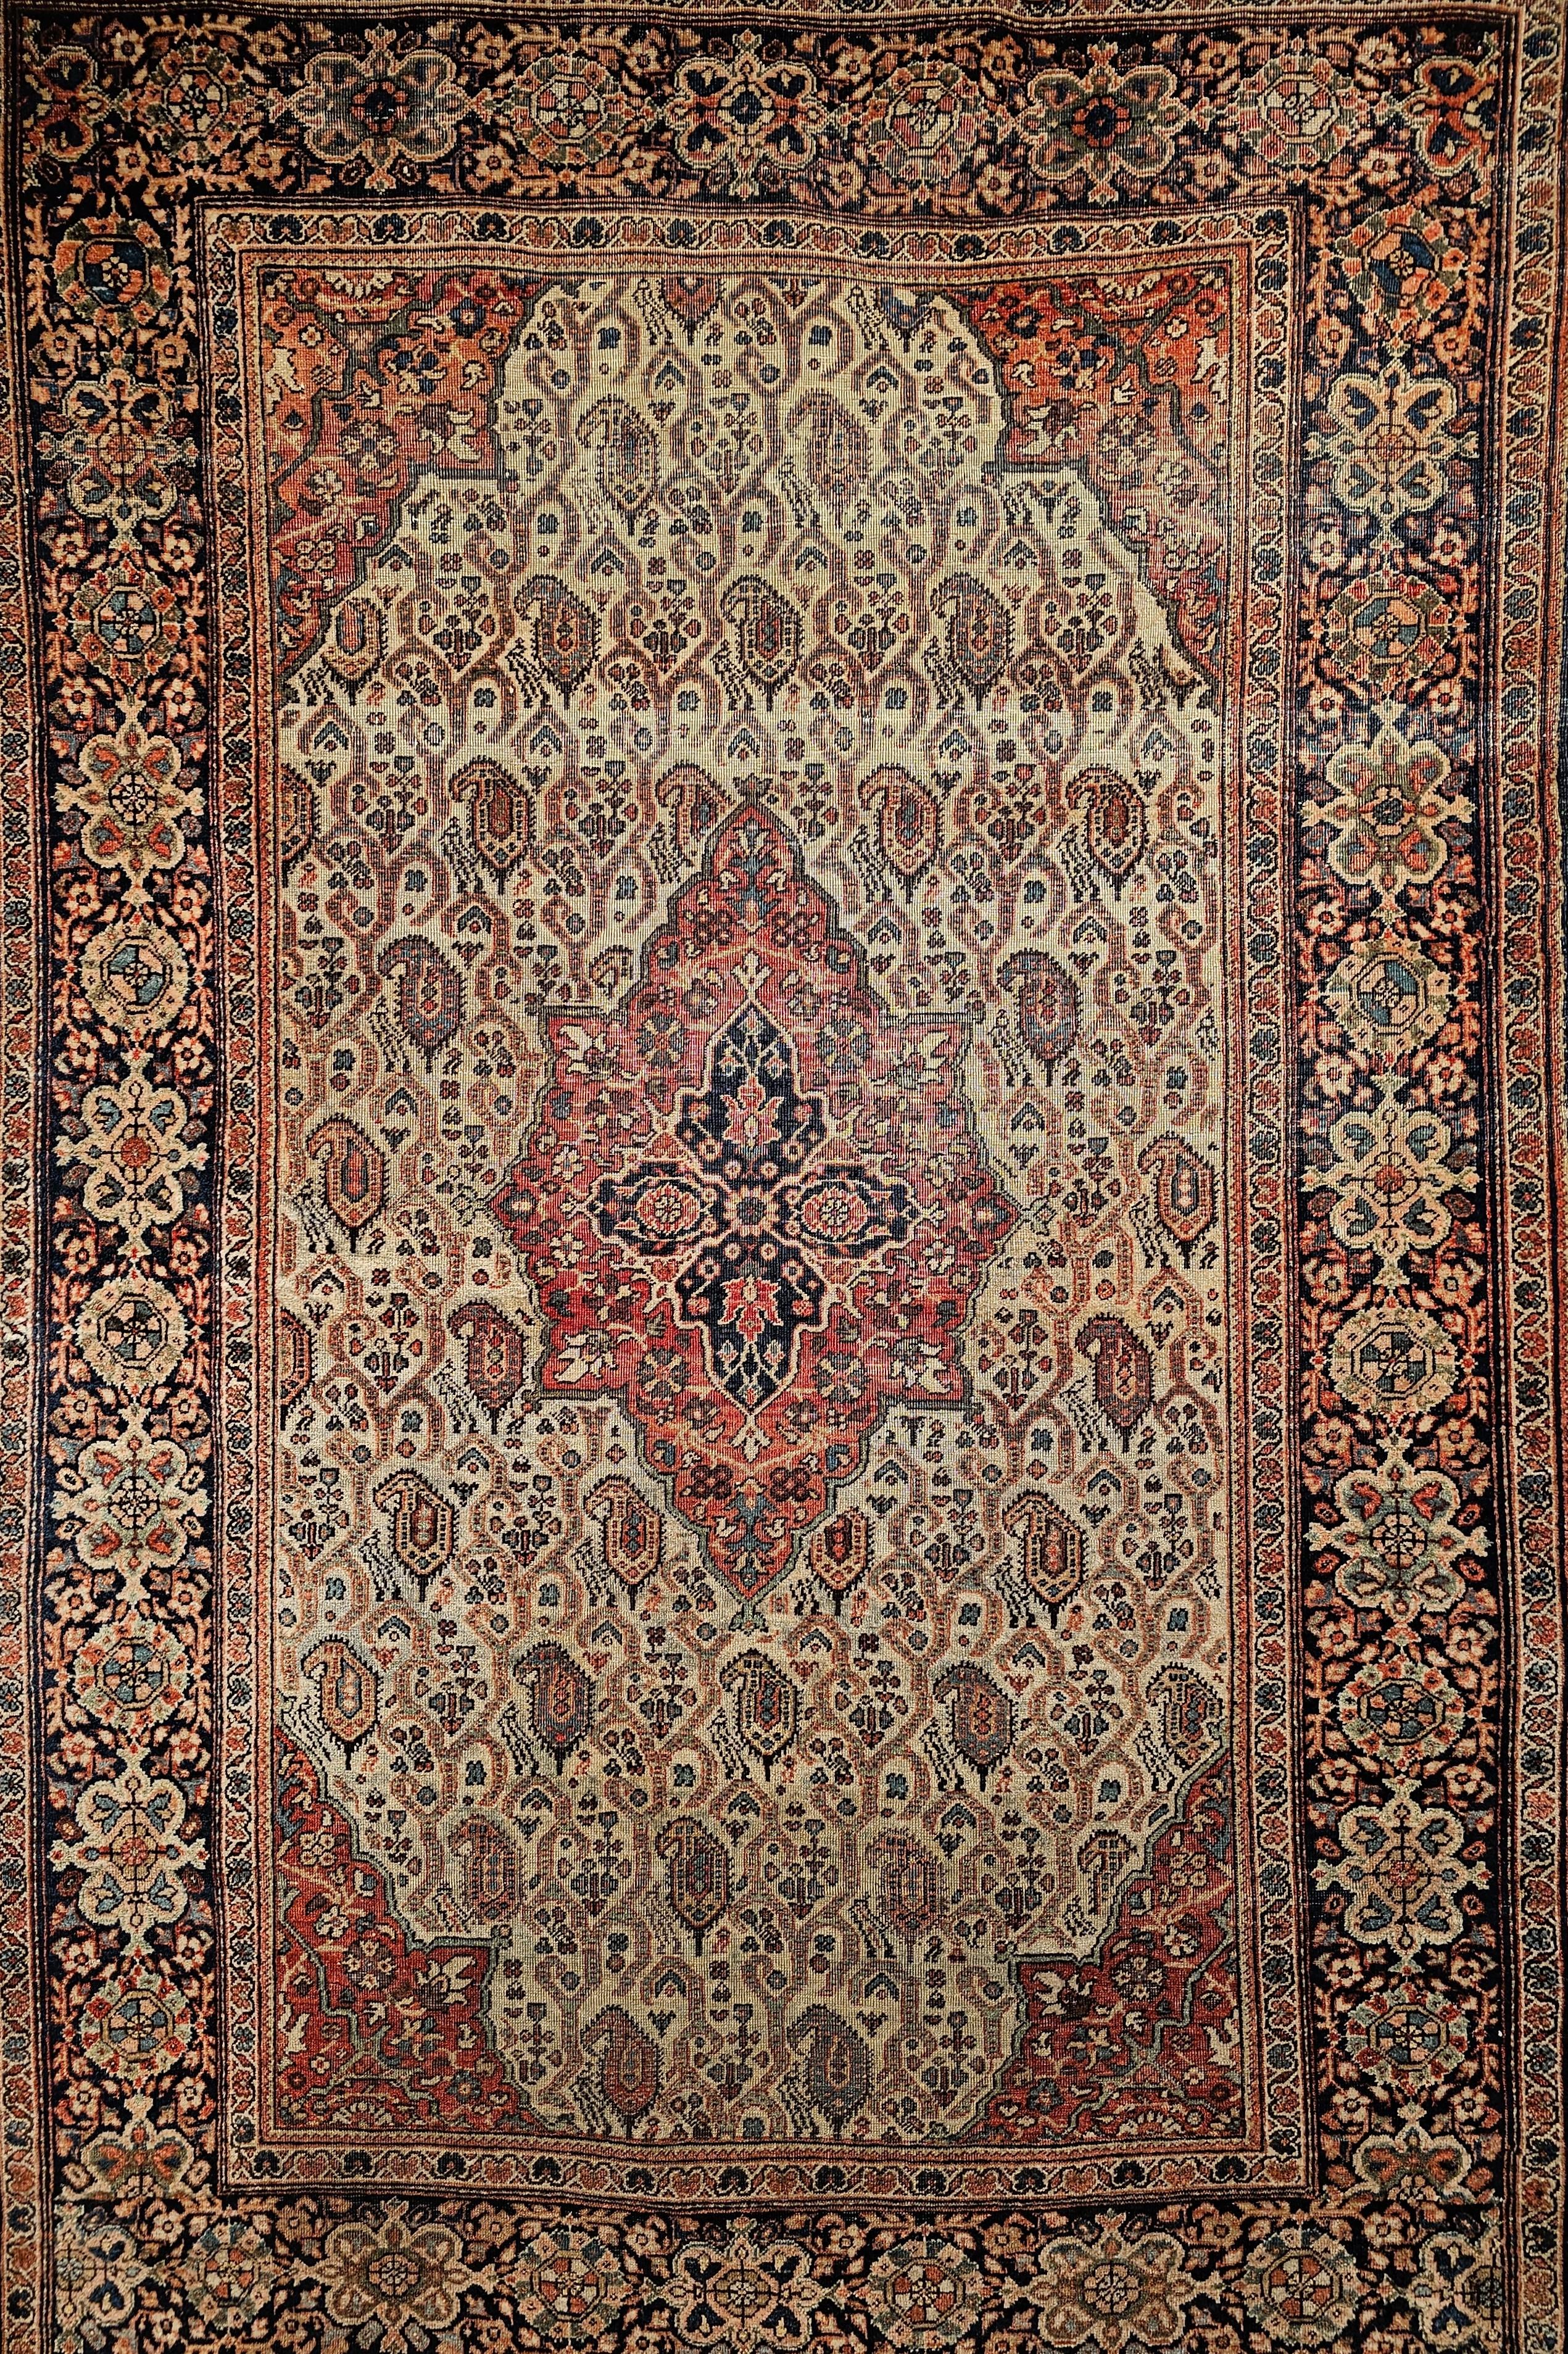 Late 1800s Persian Farahan Sarouk area rug in an allover paisley pattern in a pale green field with a rust red border.  The rug has a very unique all-over paisley design connected via scrolling lines set in a pale pistachio green field color with